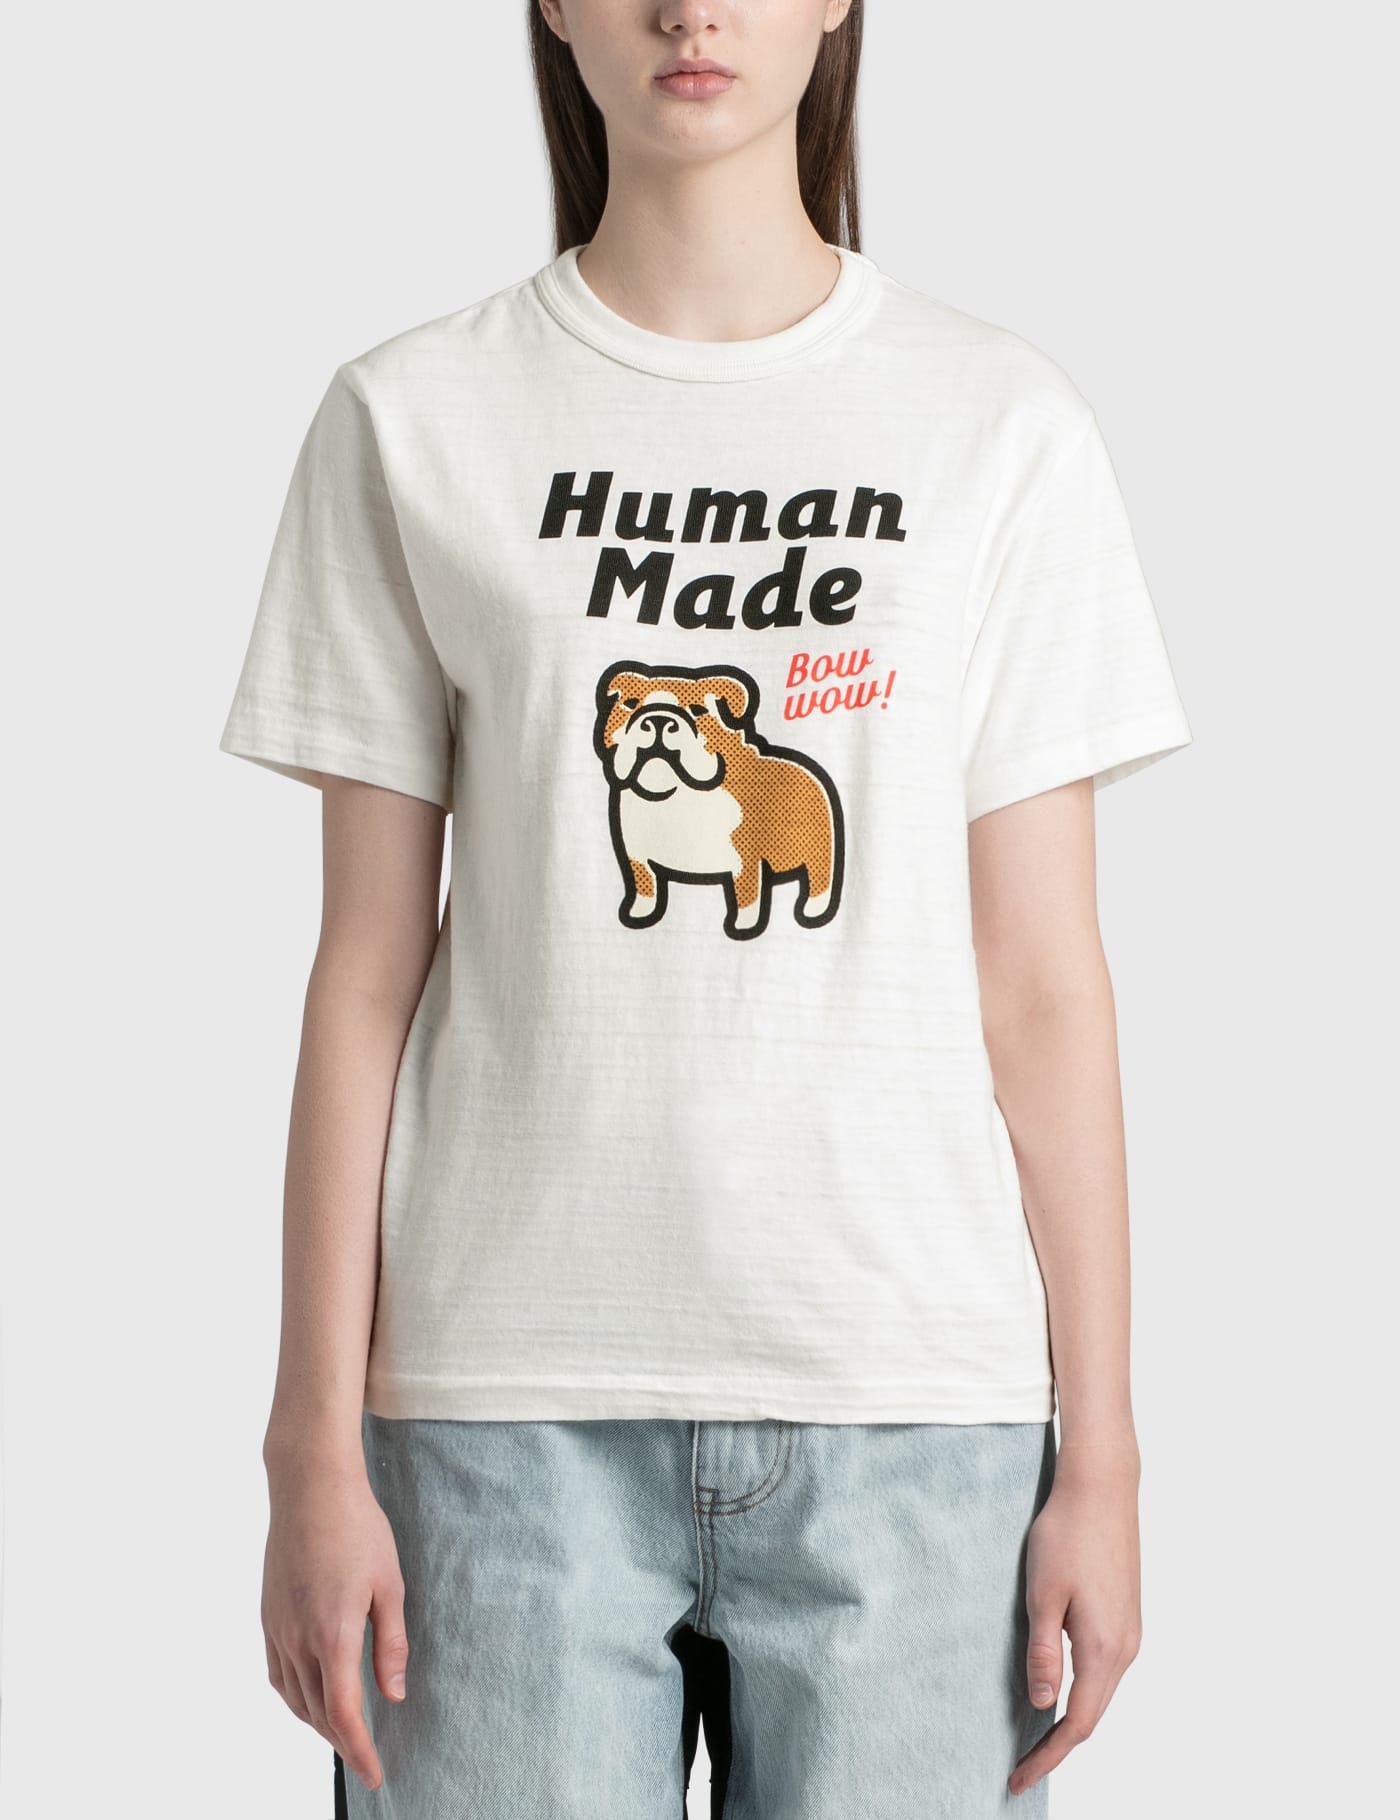 Human Made - T-shirt #2201 | HBX - Globally Curated Fashion and 